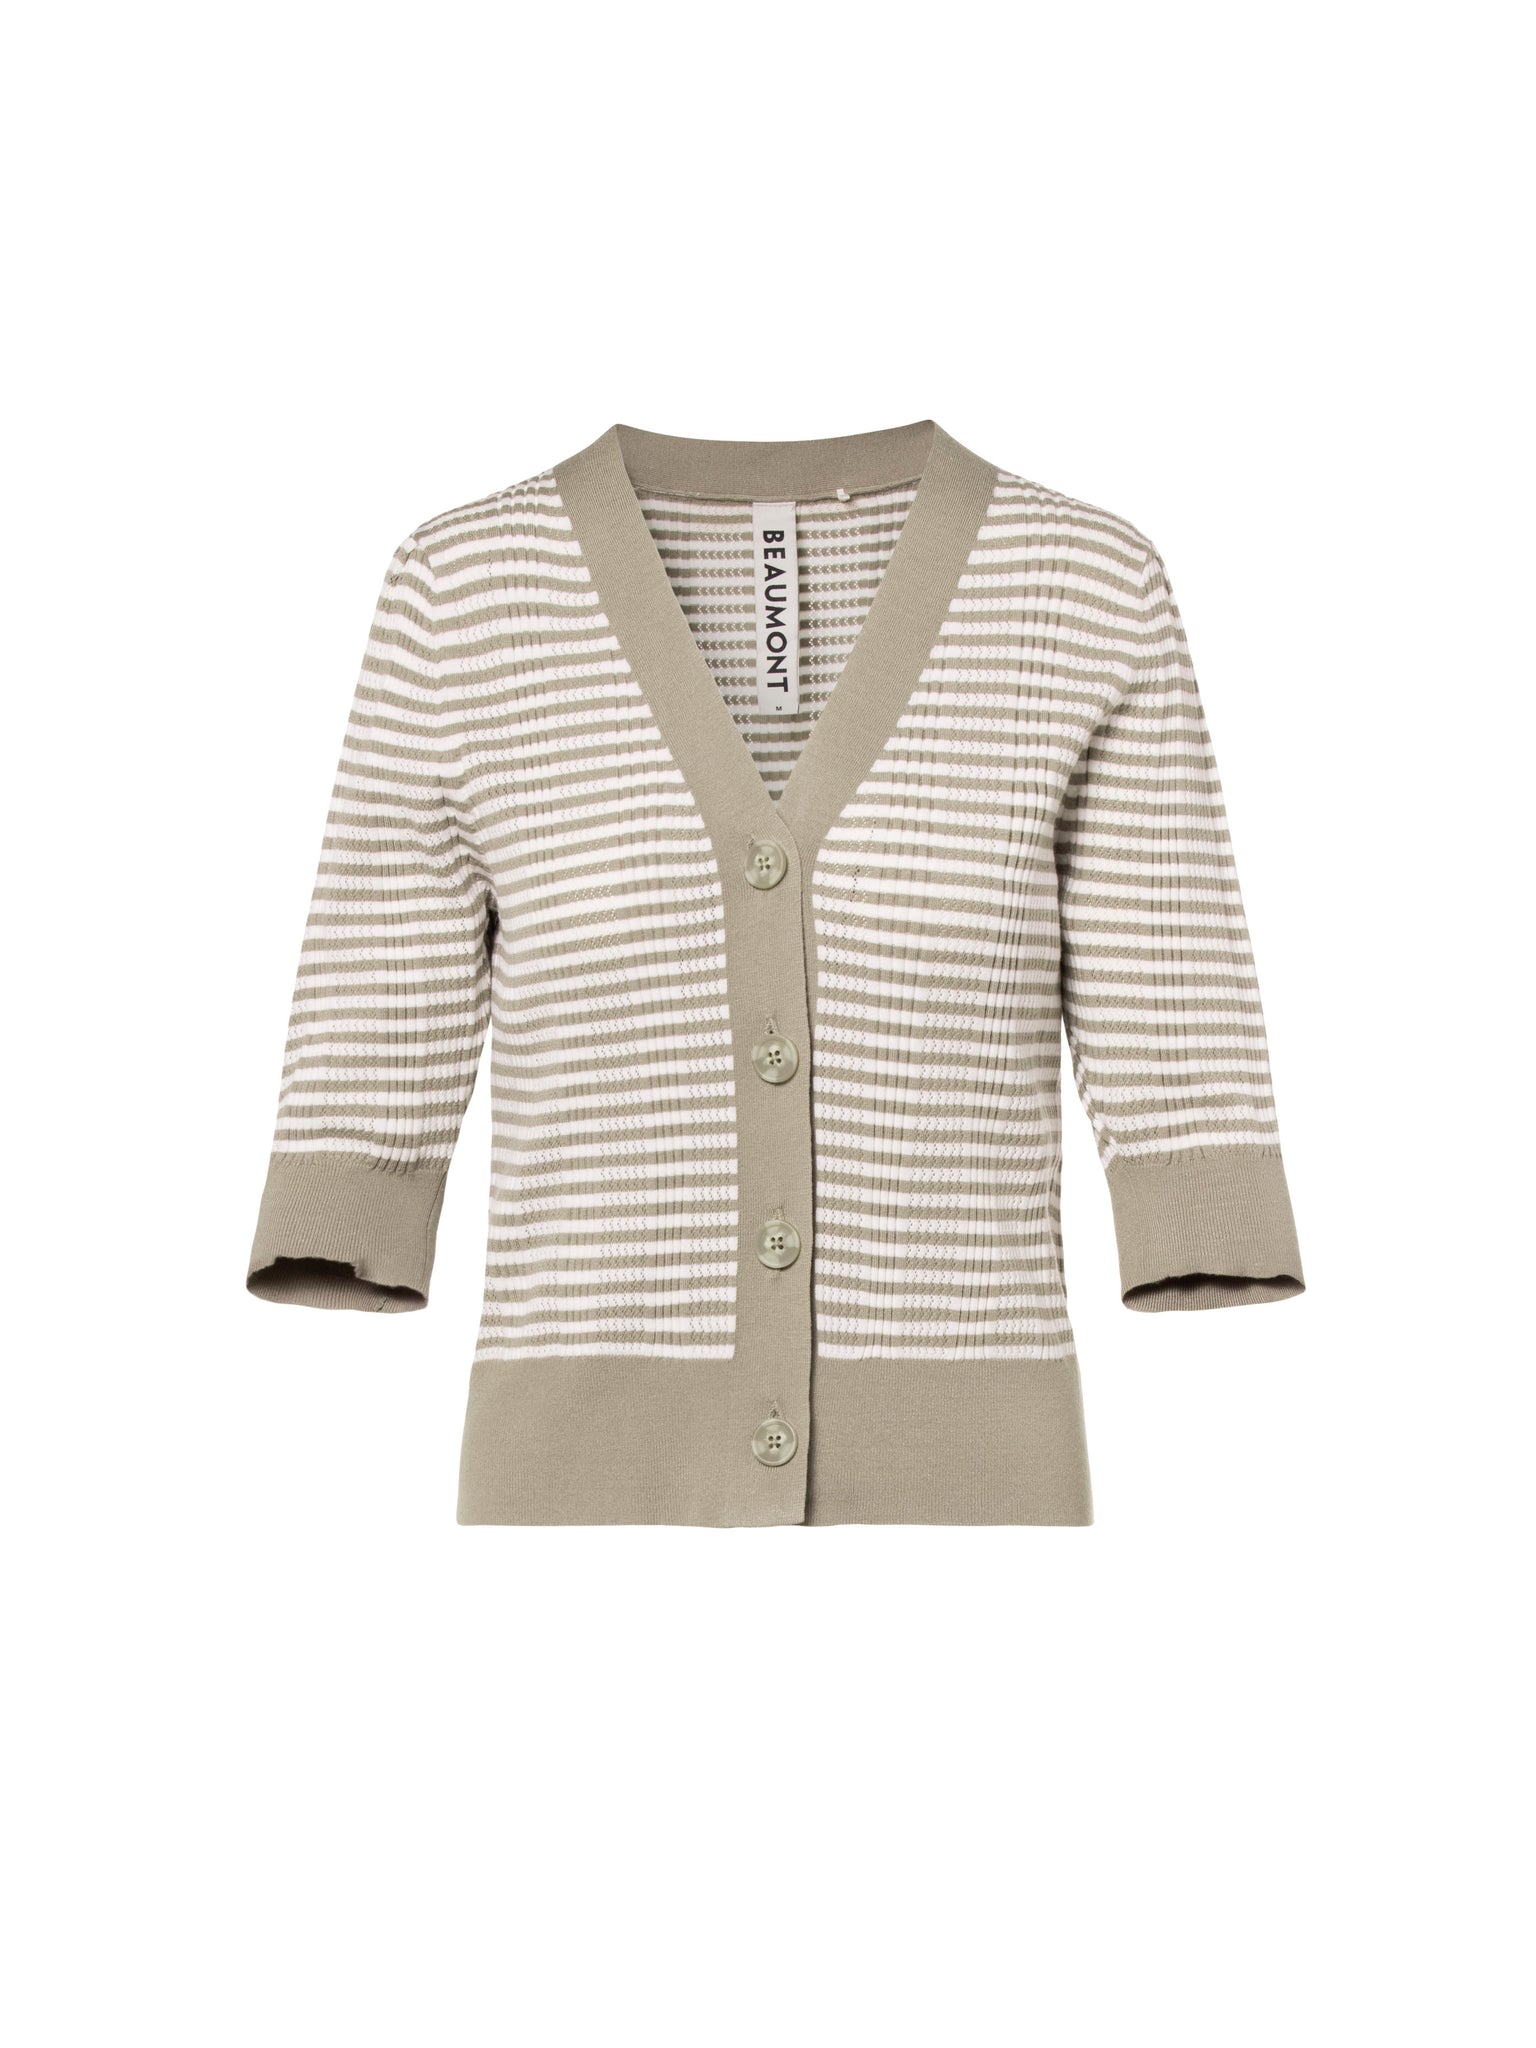 Beaumont Finley horizontal stripe button up cardigan in khaki and white Product code BC82540241